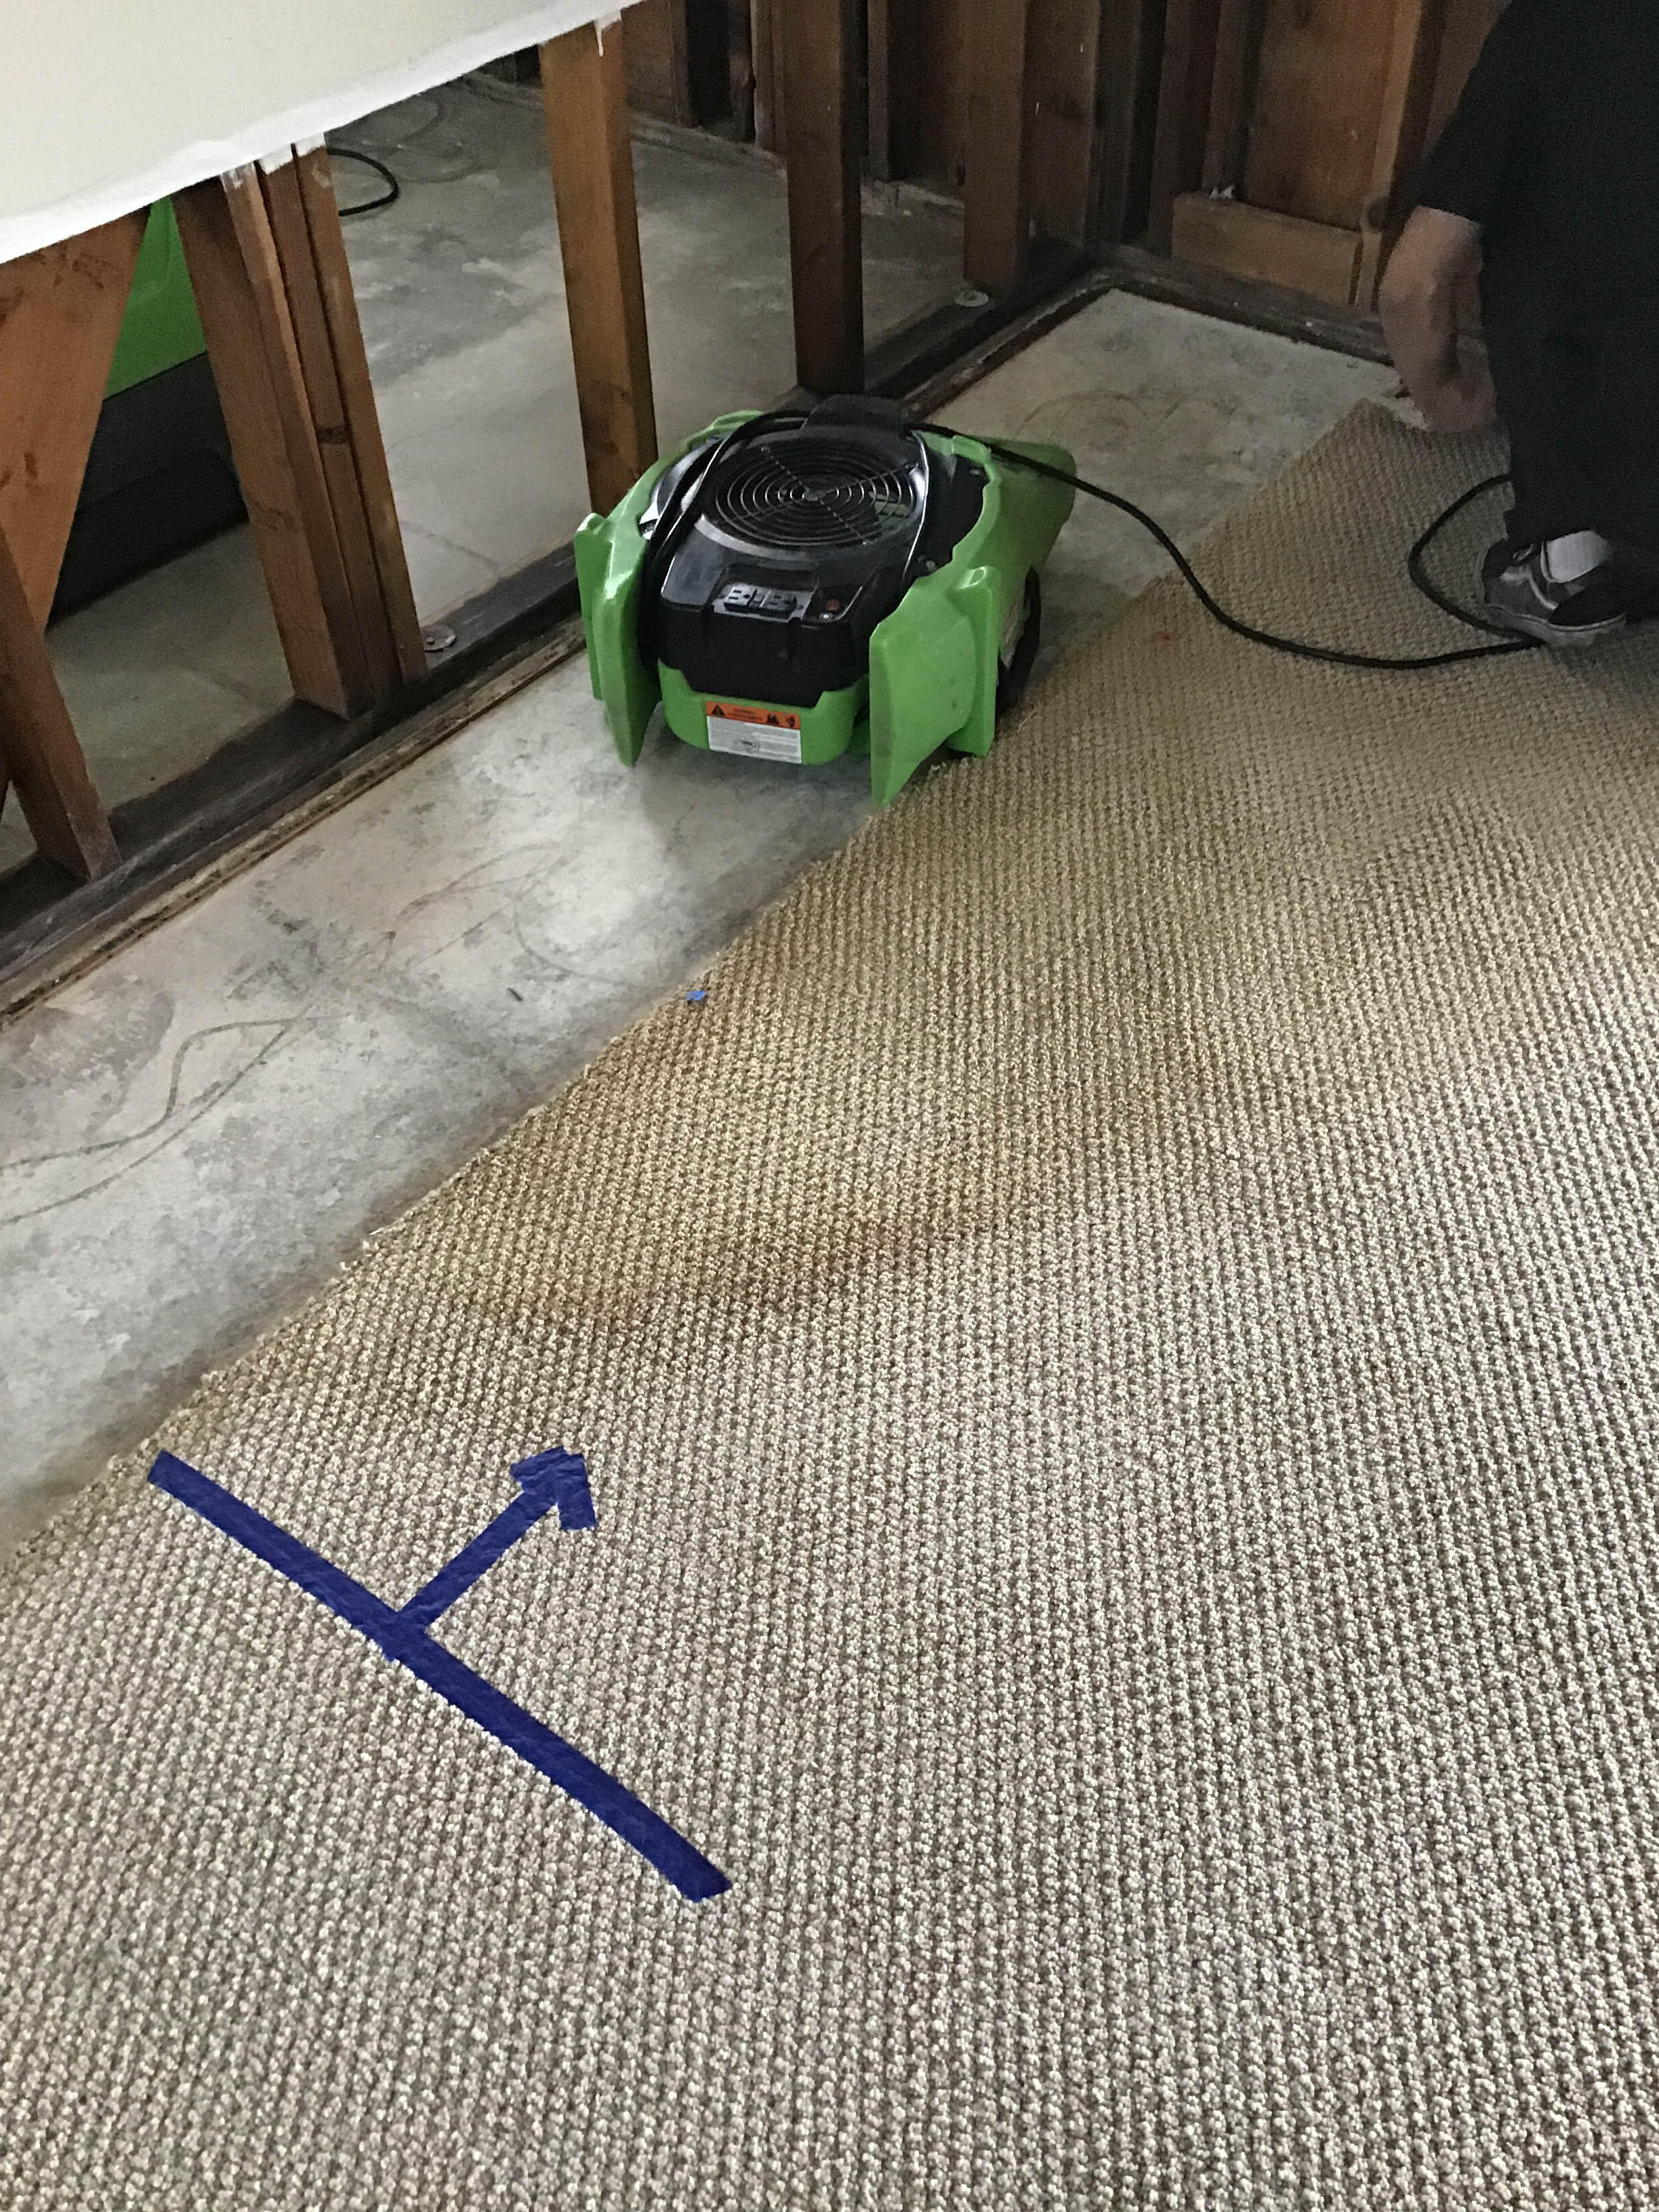 SERVPRO of Laguna Beach/ Dana Point provides water damage repair and restoration services in your Laguna Beach, CA area. Call us today! We are available 24/7.